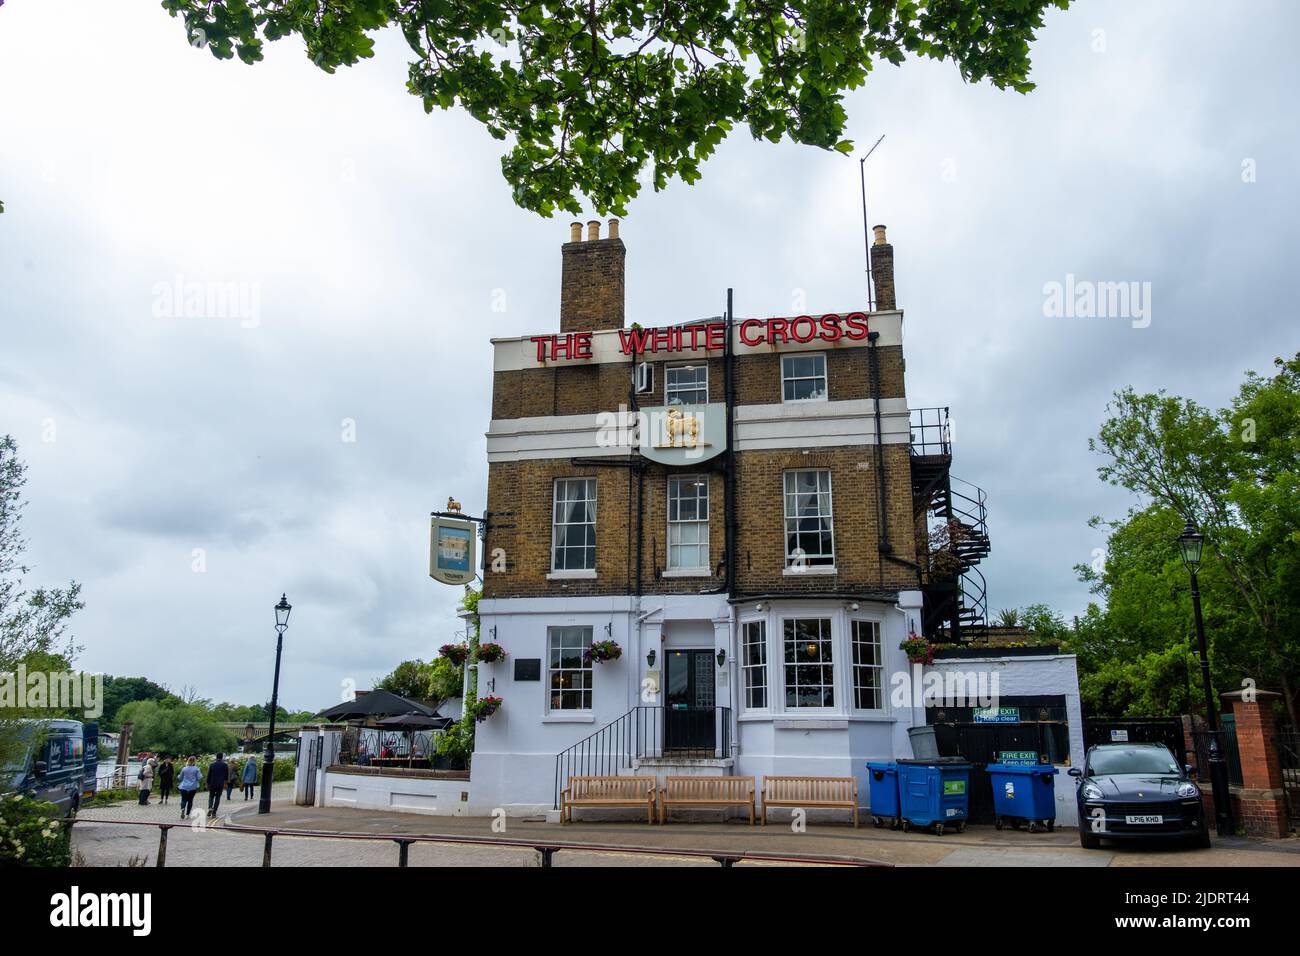 London- May 2022: The White Cross pub on the banks of the River Thames in Richmond, south west London Stock Photo